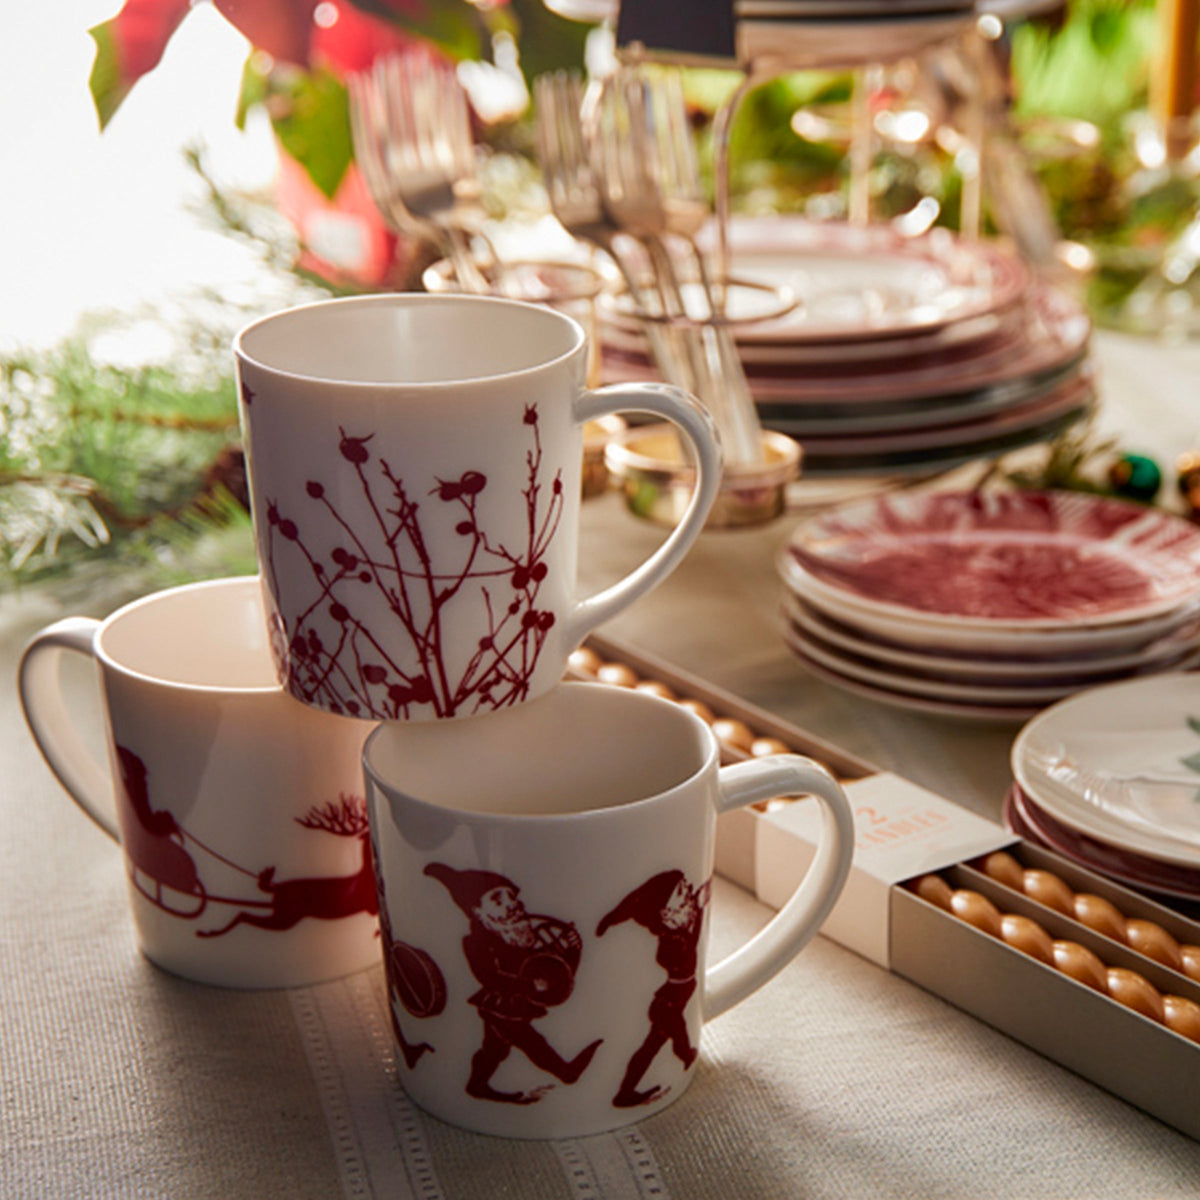 Three Elves Mugs from Caskata Artisanal Home with red holiday designs are stacked on a decorated table, surrounded by an assortment of plates, flatware, and festive accents. This holiday collection exudes charm with hints of playful elves adding a touch of whimsy to the scene.